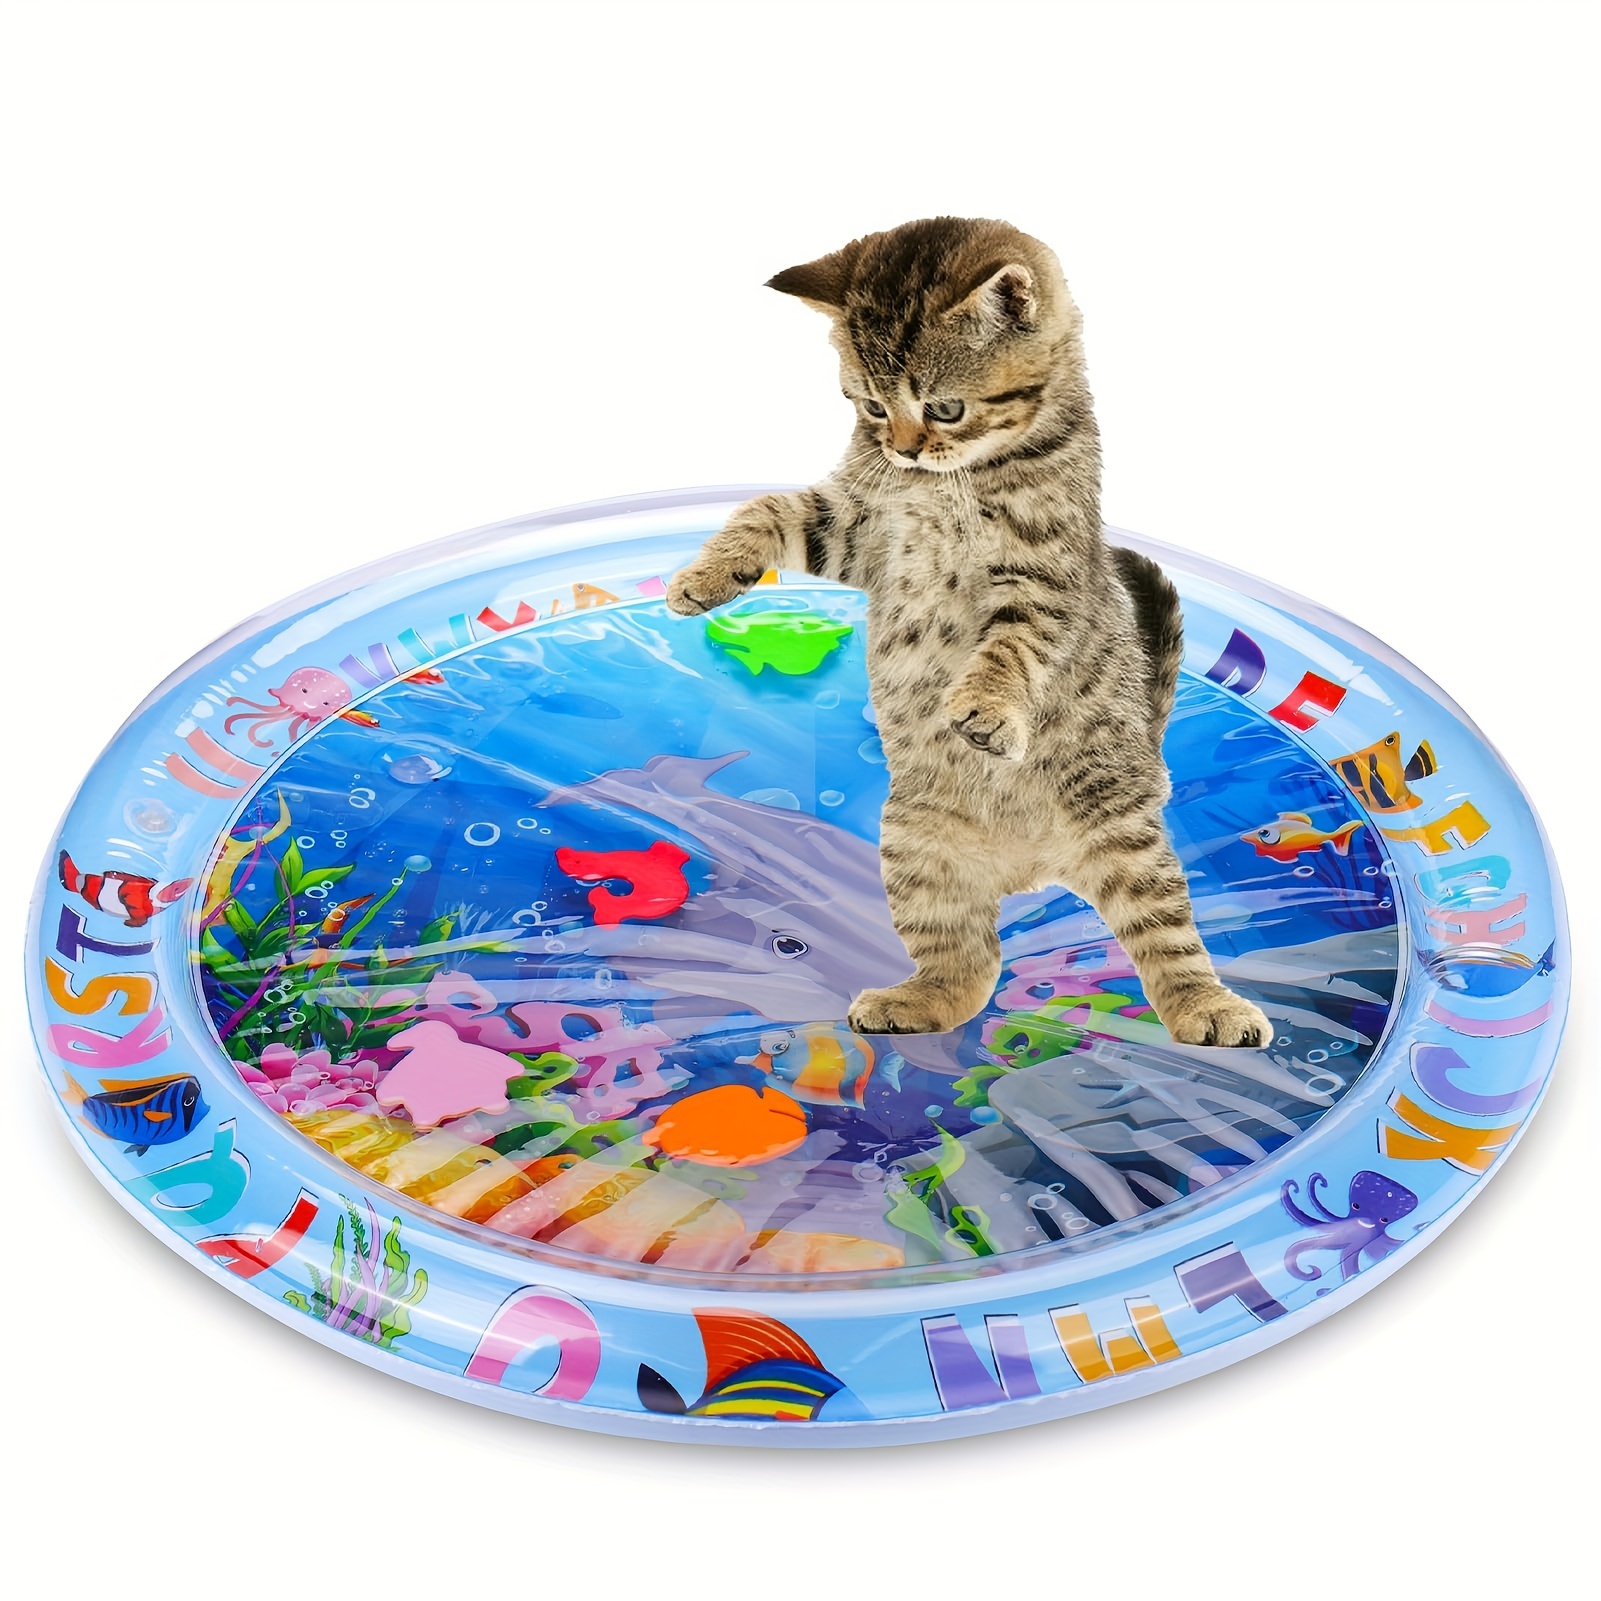 

Inflatable Water Mat For Pets, Marine-themed Play Pad, 23.5in Diameter Pvc Splash Mat For Cats & Small Animals, Sea Life Swimming Ring Design, Leak-proof Indoor/outdoor Seating Cushion